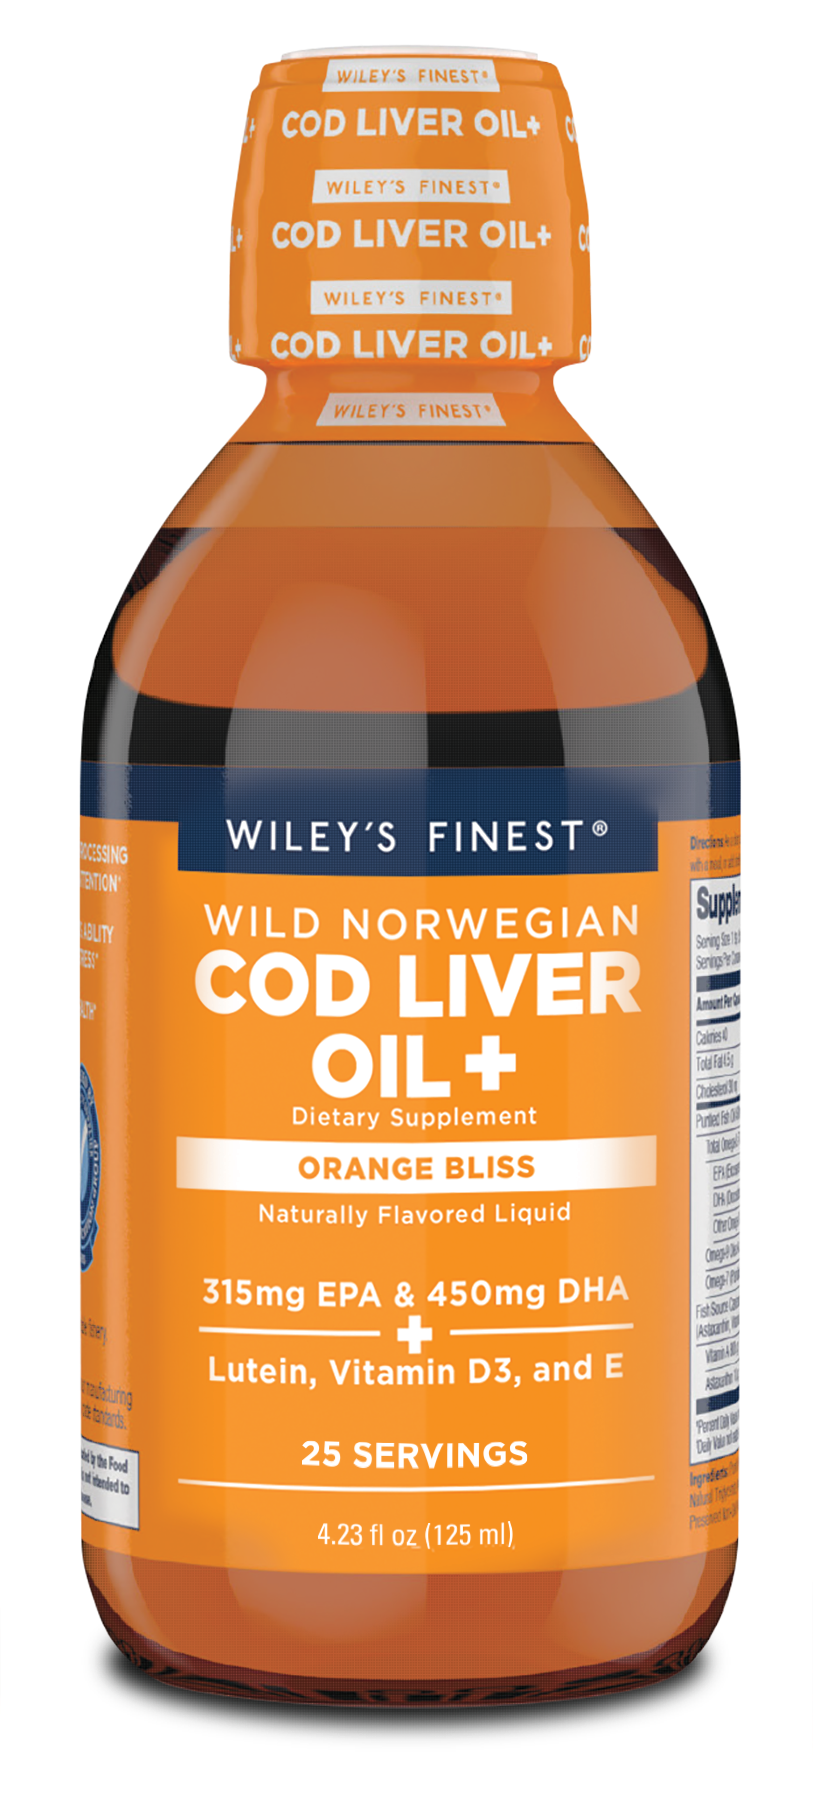 Cod Liver Oil Plus. Image courtesy of Wiley's Finest